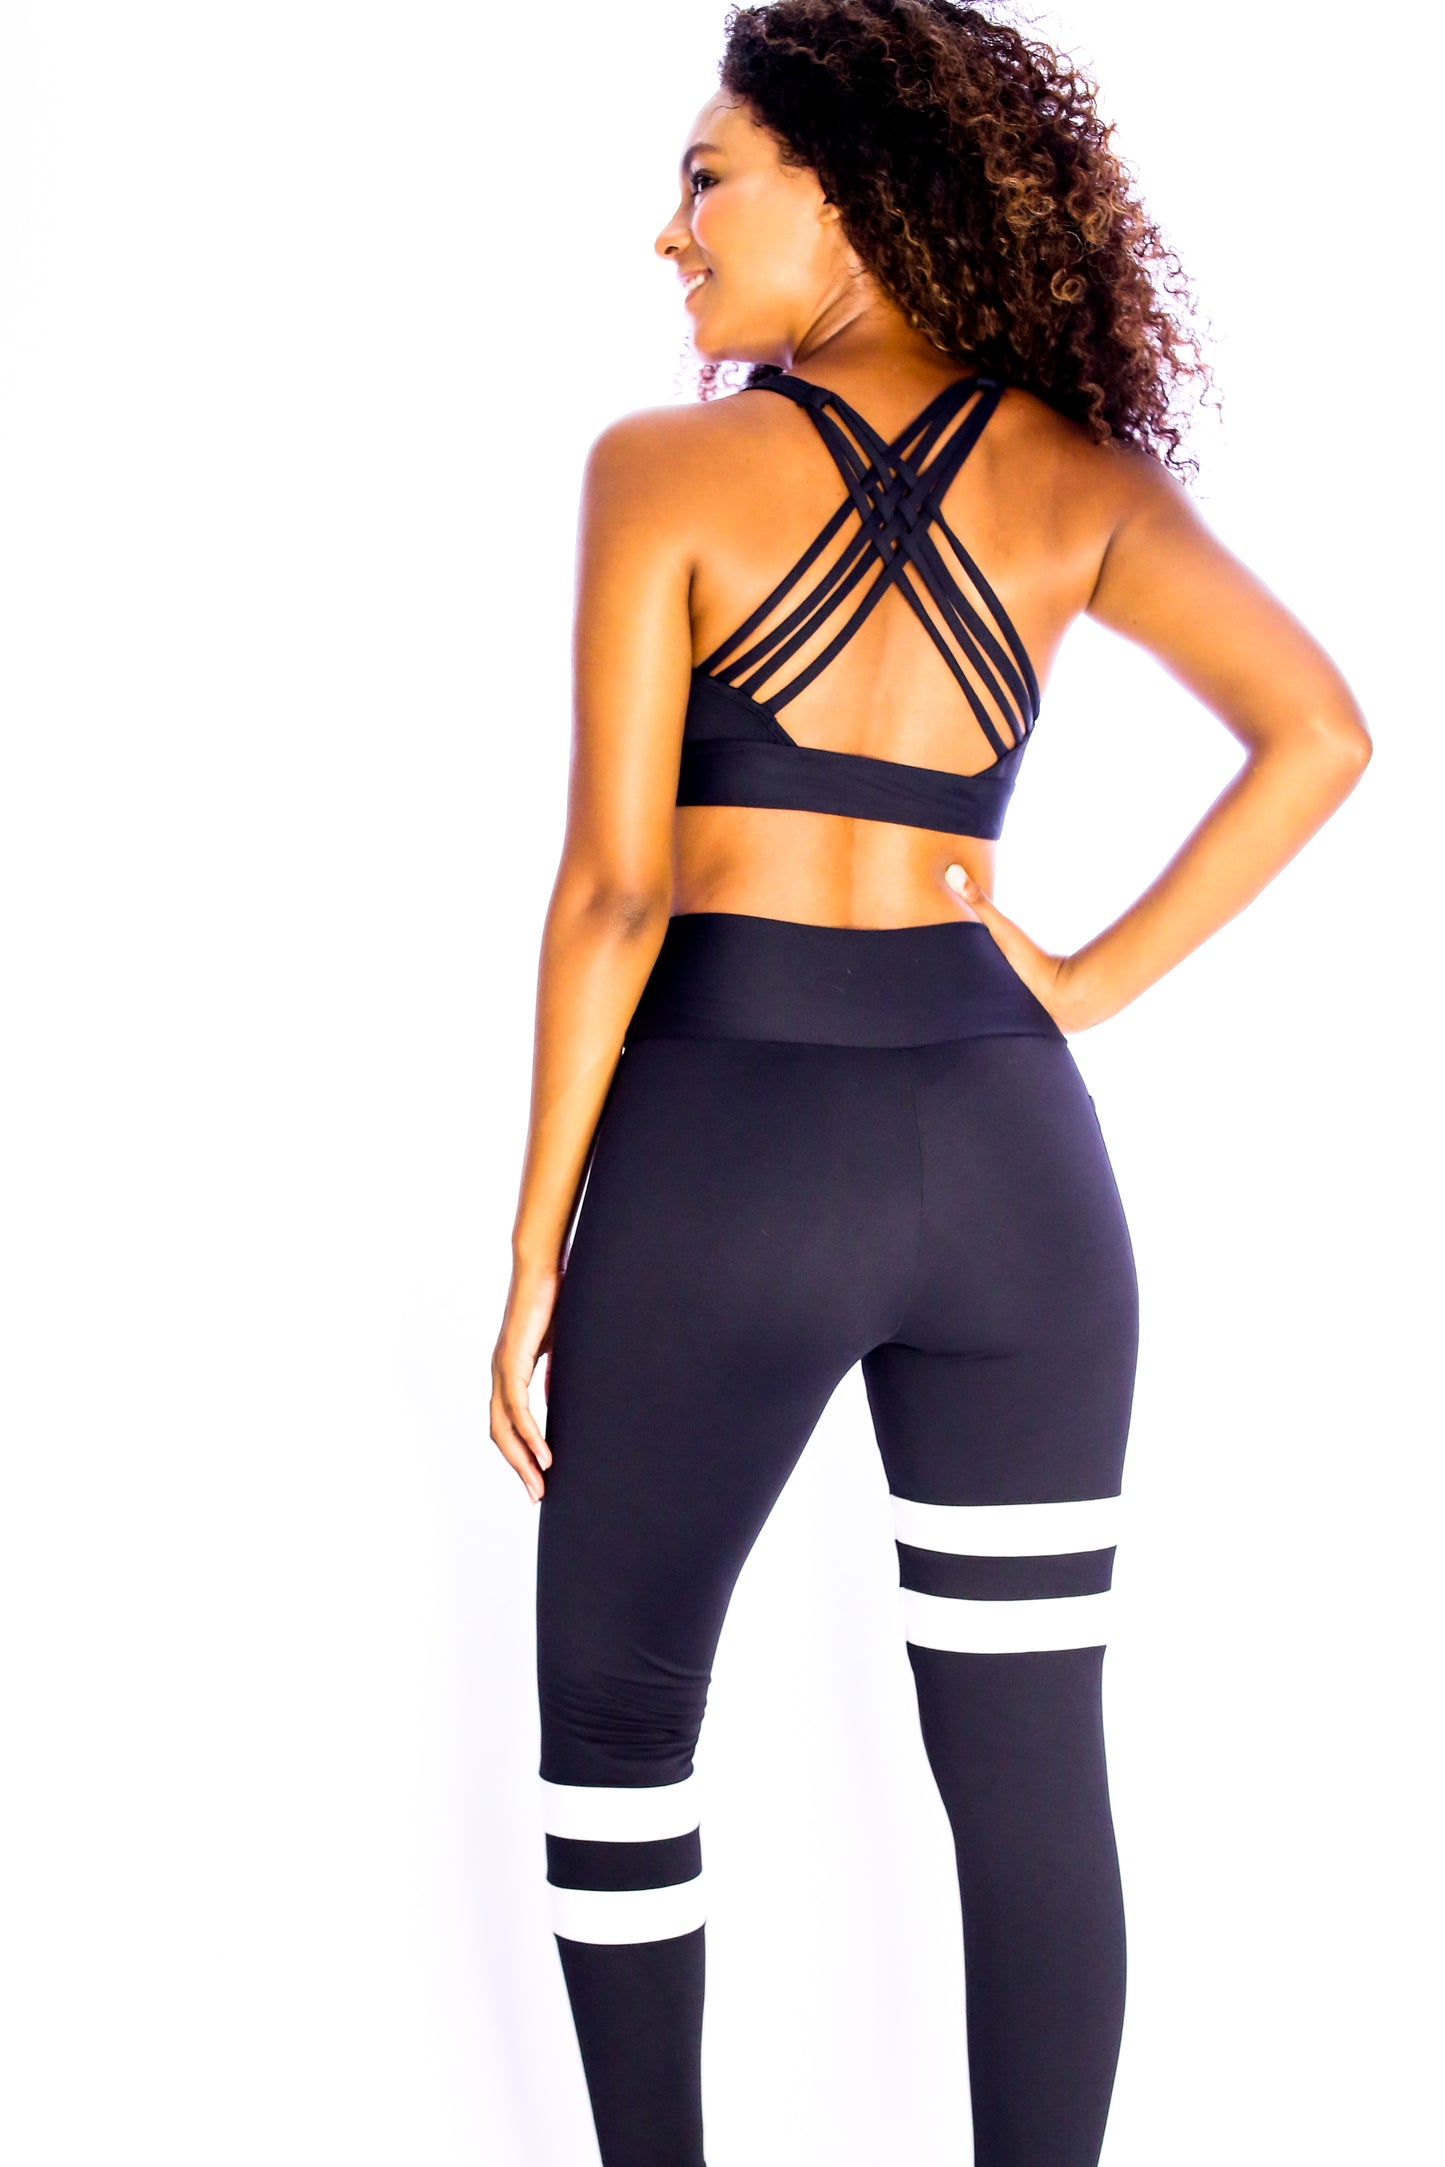 Sport Sailor Style  Black and white Leggings with Pocket